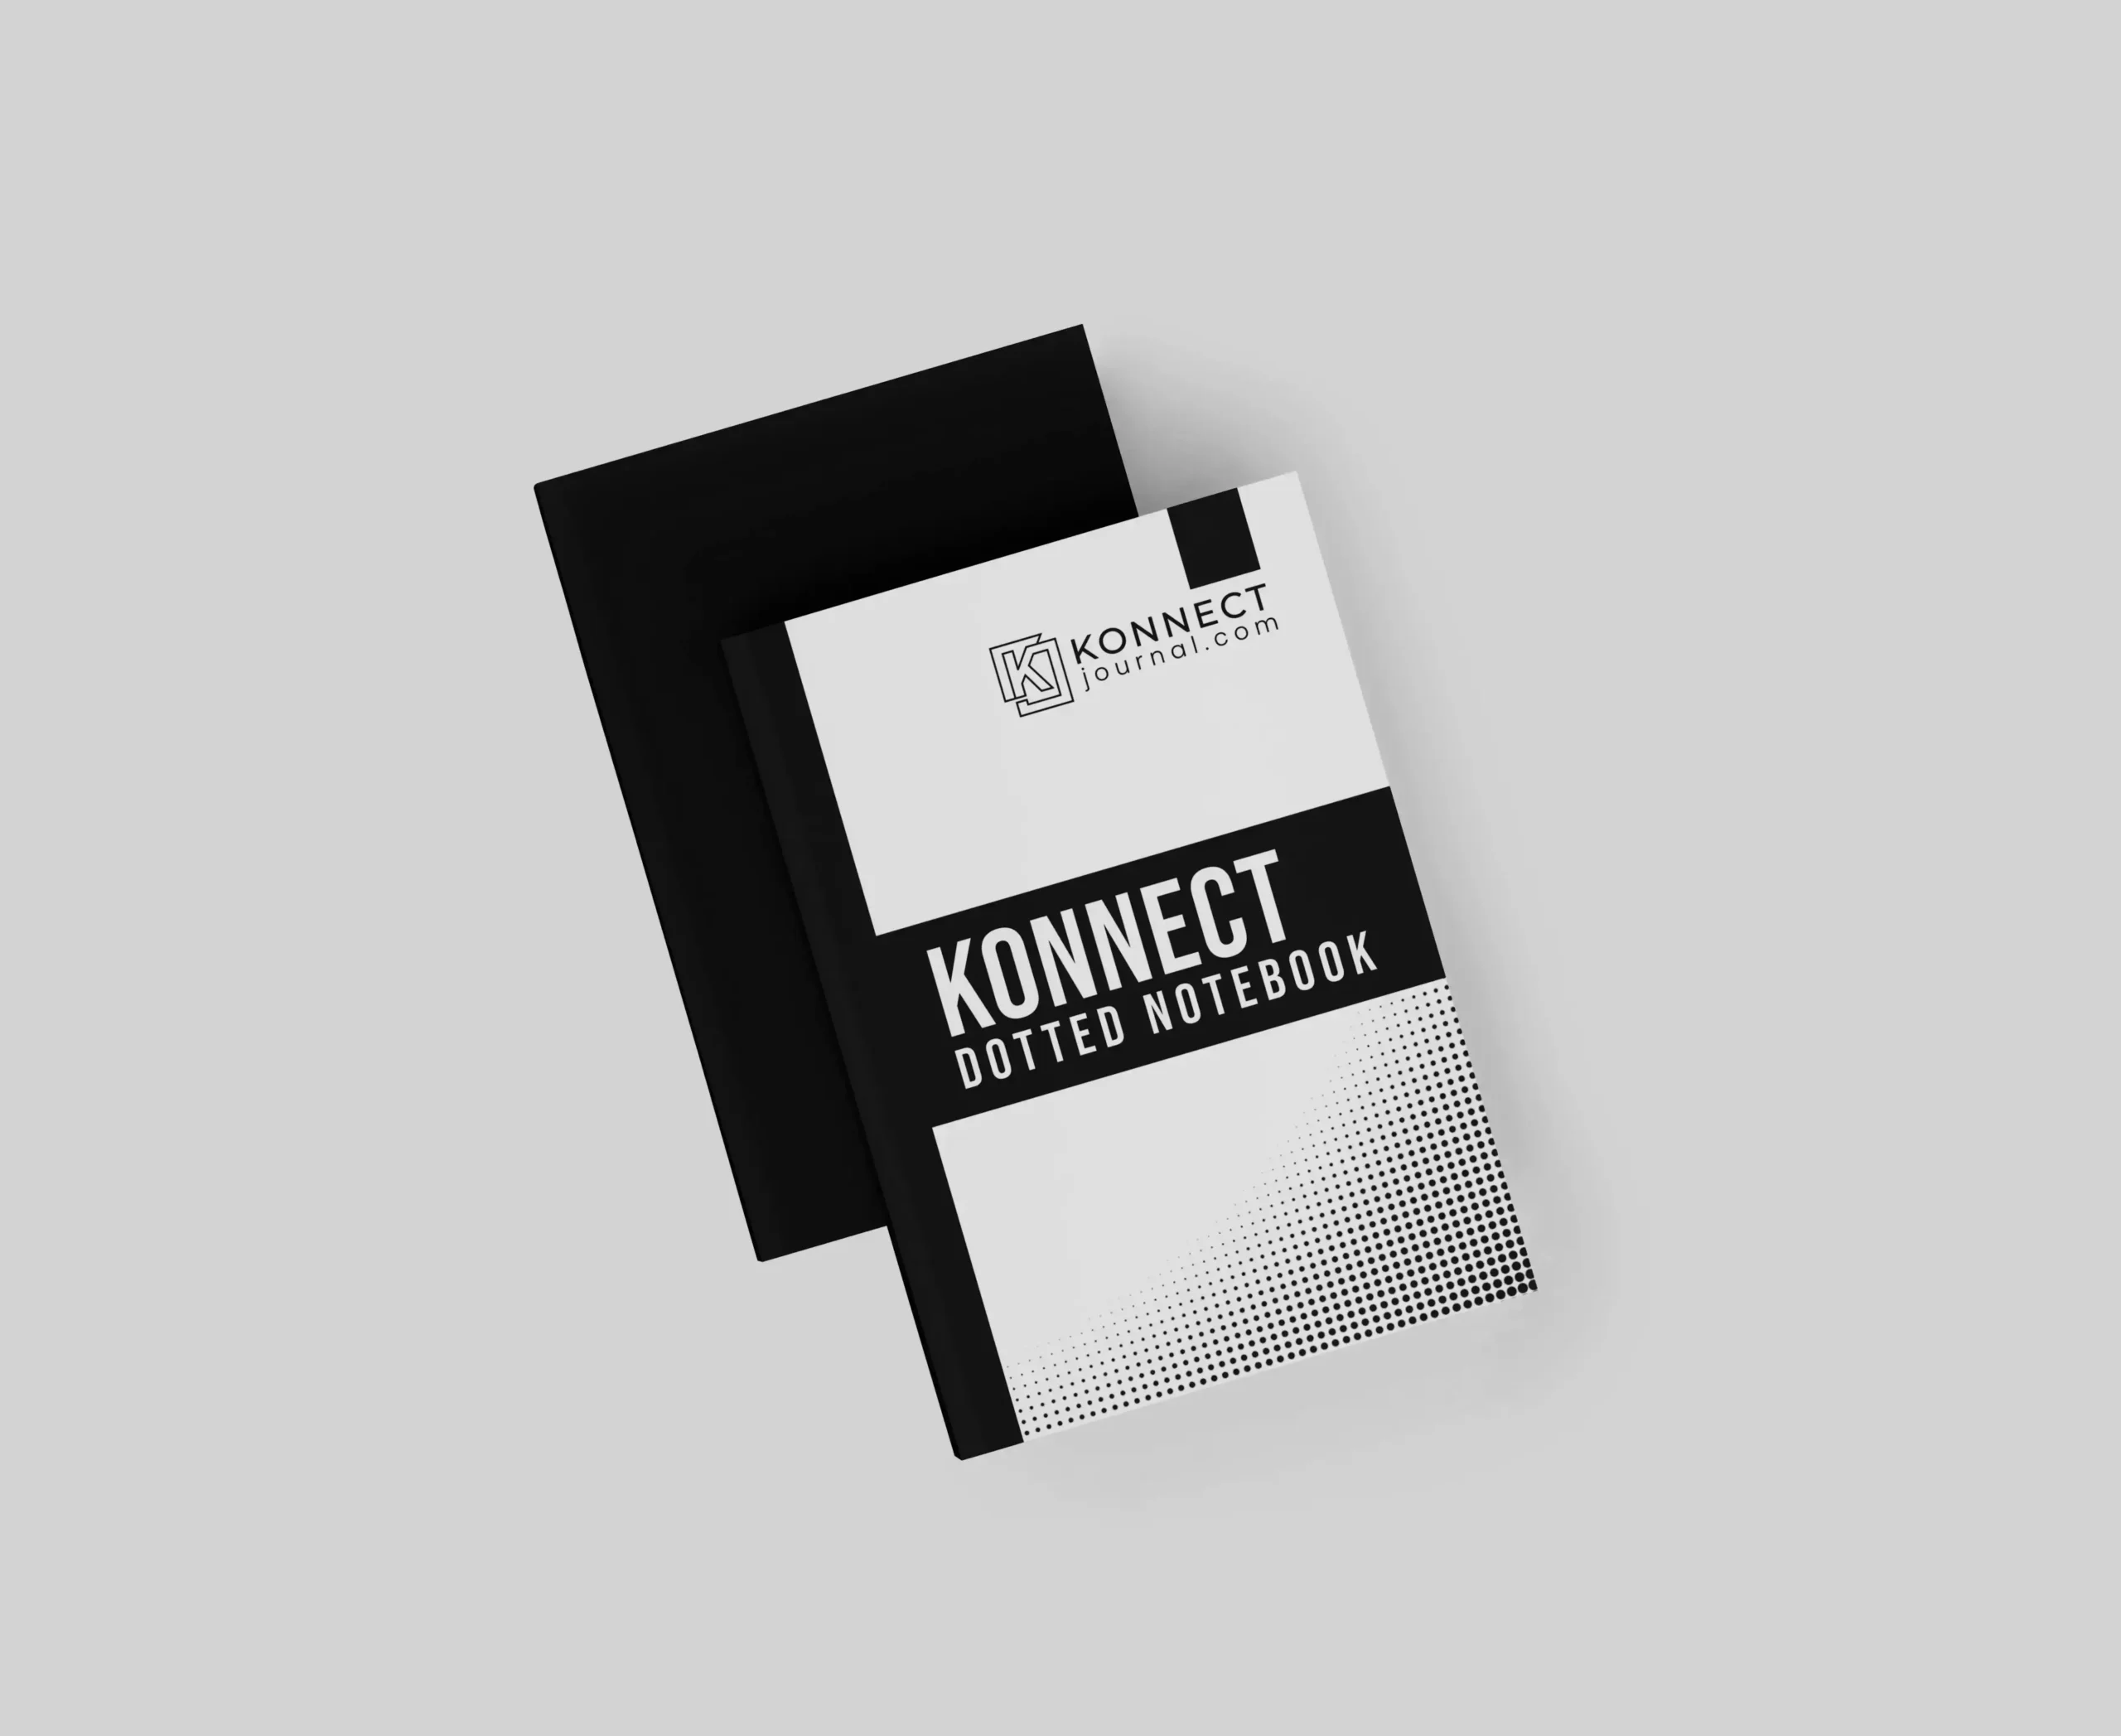 Konnect Dotted Notebook